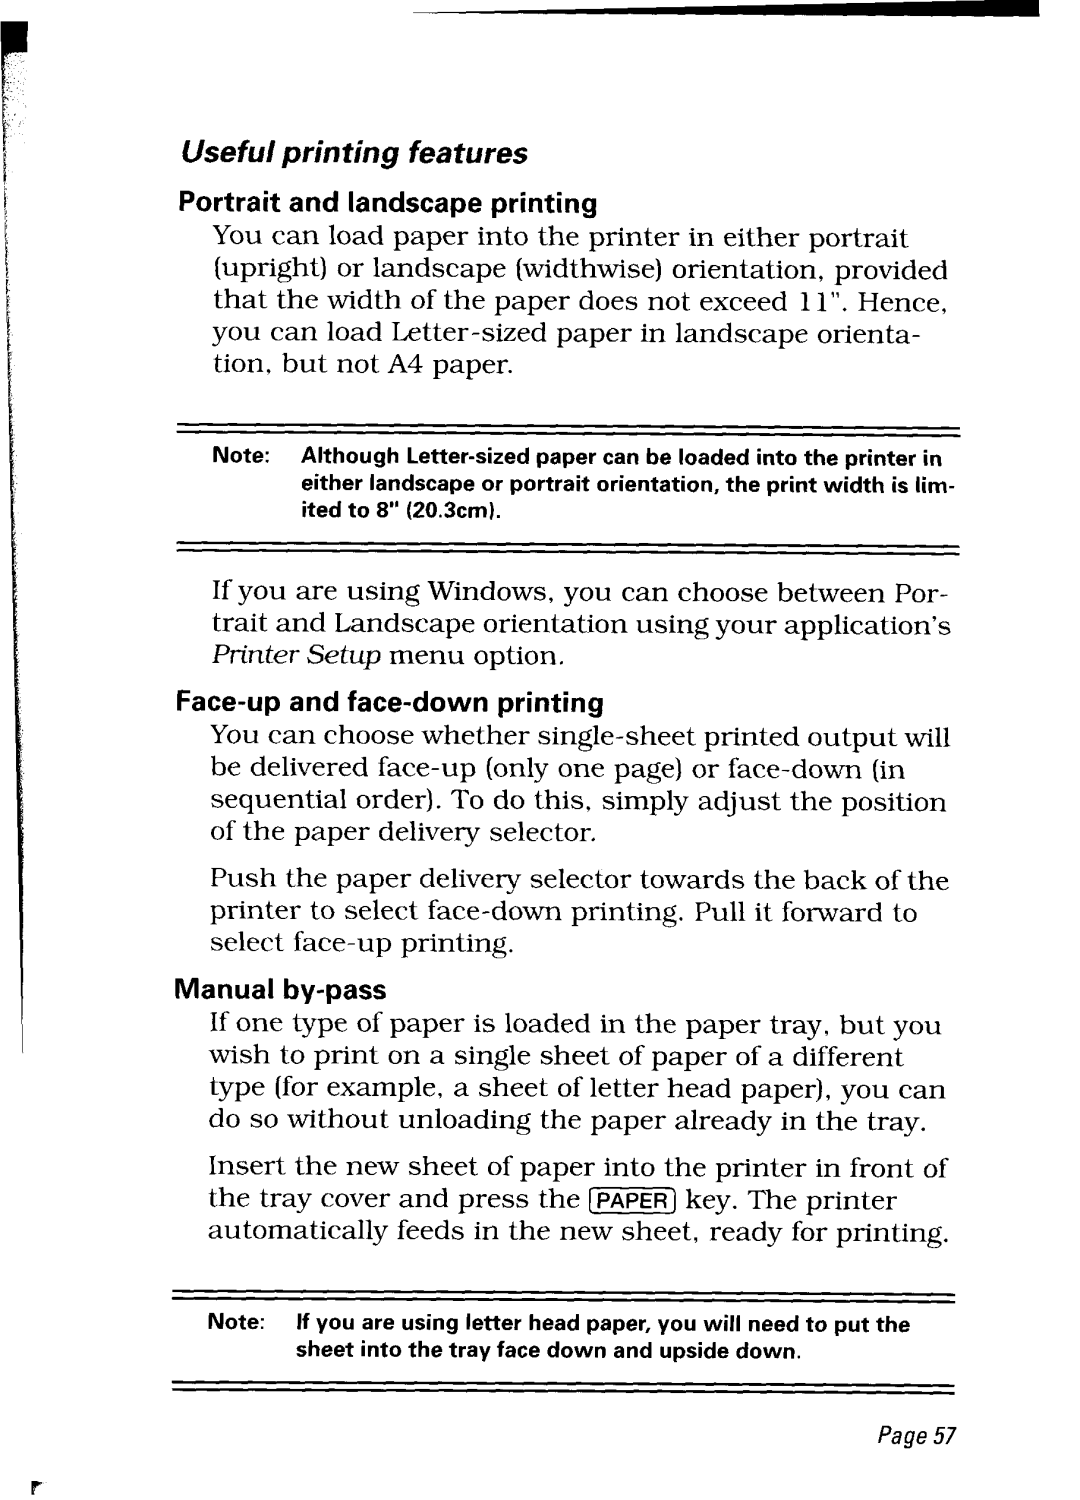 Star Micronics LC24-30 user manual Portrait and landscape printing, Face-up and face-down printing, Manual by-pass 